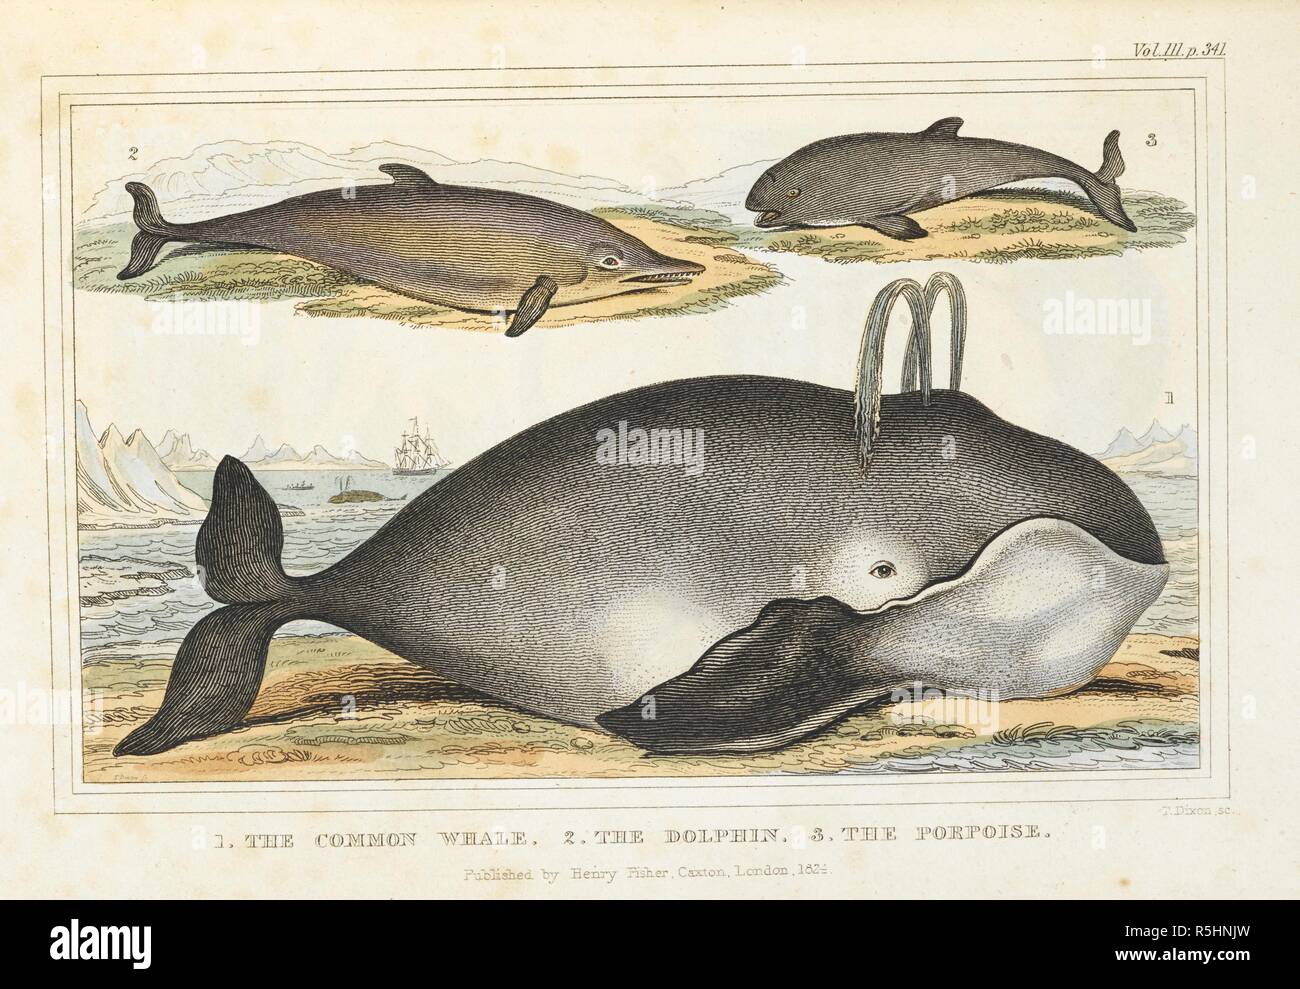 1. The common whale. 2. The dolphin. 3. The porpoises. The history of the earth and animated nature. London : printed by Henry Fisher, at the Caxton Press, [1824?]. Source: RB.23.b.3192 volume 3 page 341. Author: GOLDSMITH, OLIVER. Dixon, T. Stock Photo